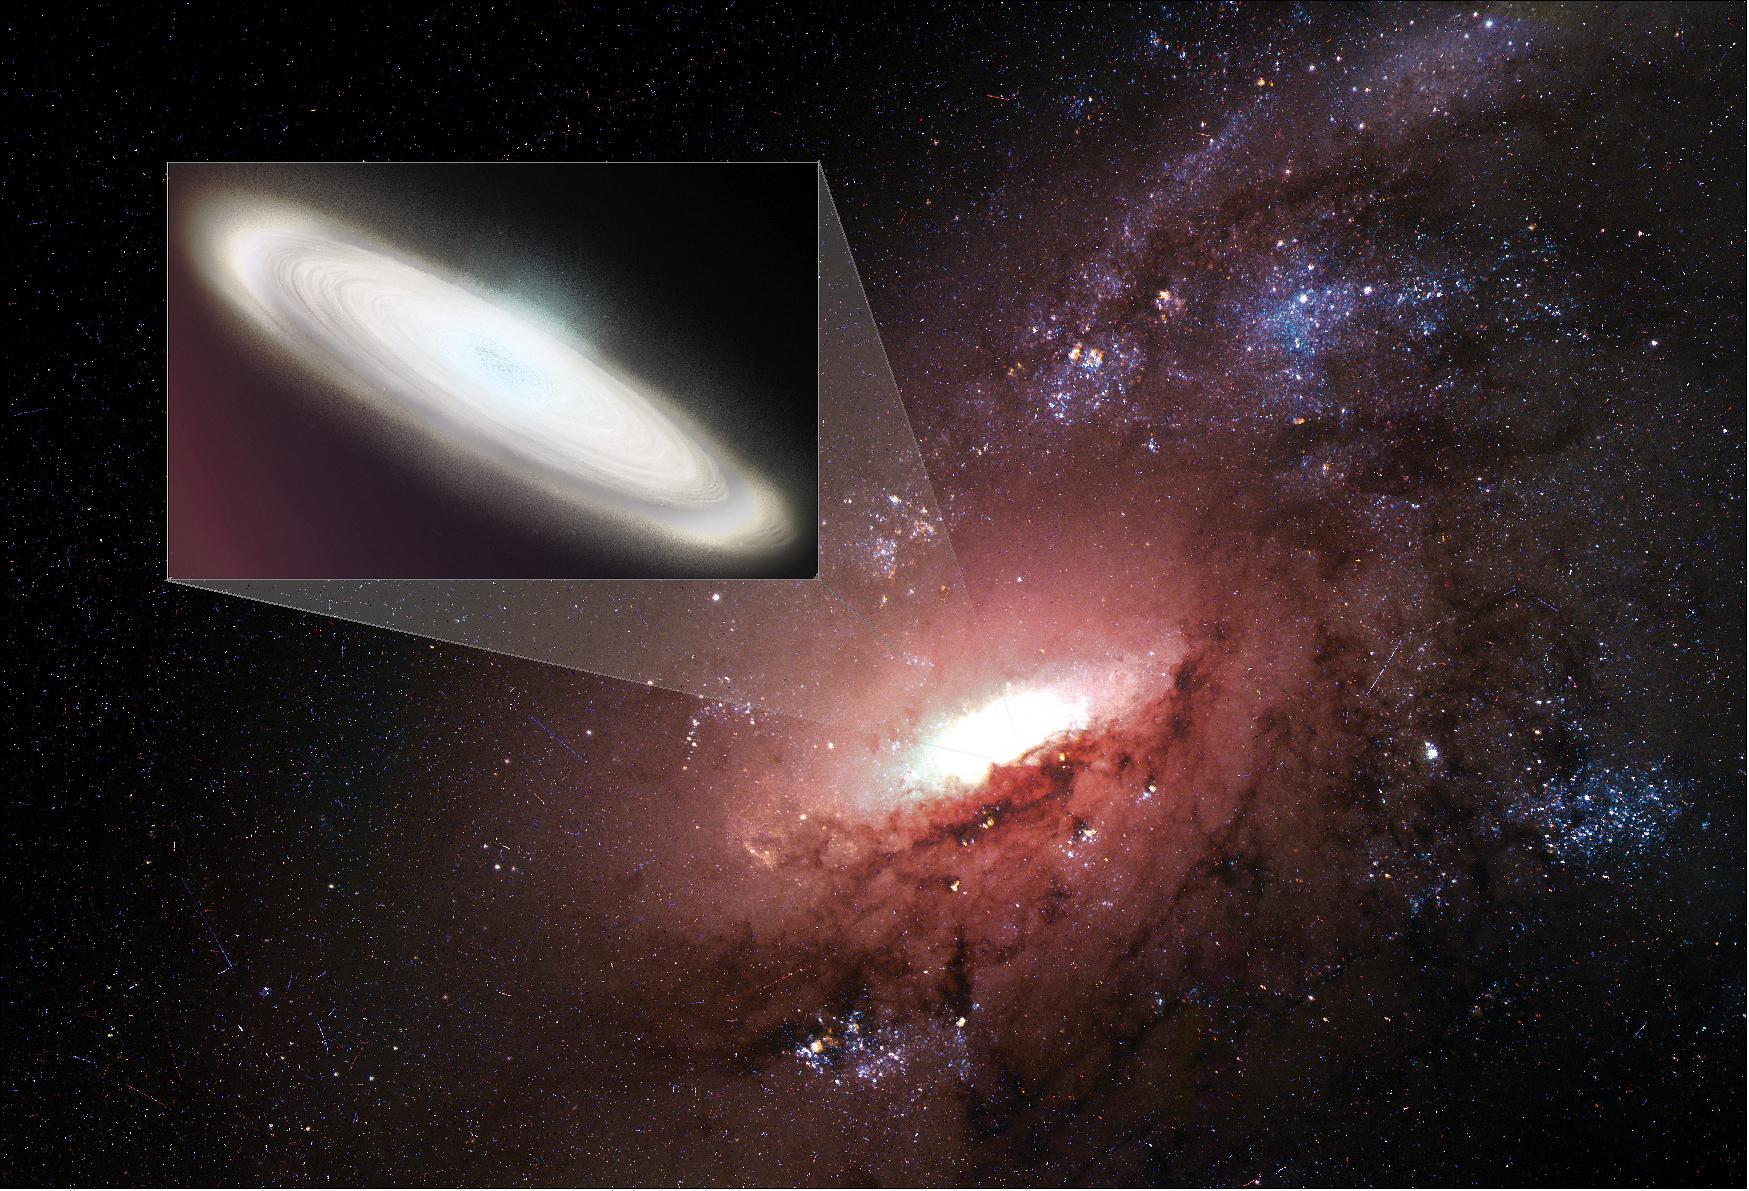 Figure 51: Artist's conception illustrating a disk of water-bearing gas orbiting the supermassive black hole at the core of a distant galaxy. By observing maser emission from such disks, astronomers can use geometry to measure the distance to the galaxies, a key requirement for calculating the Hubble Constant (image credit: Sophia Dagnello, NRAO/AUI/NSF)